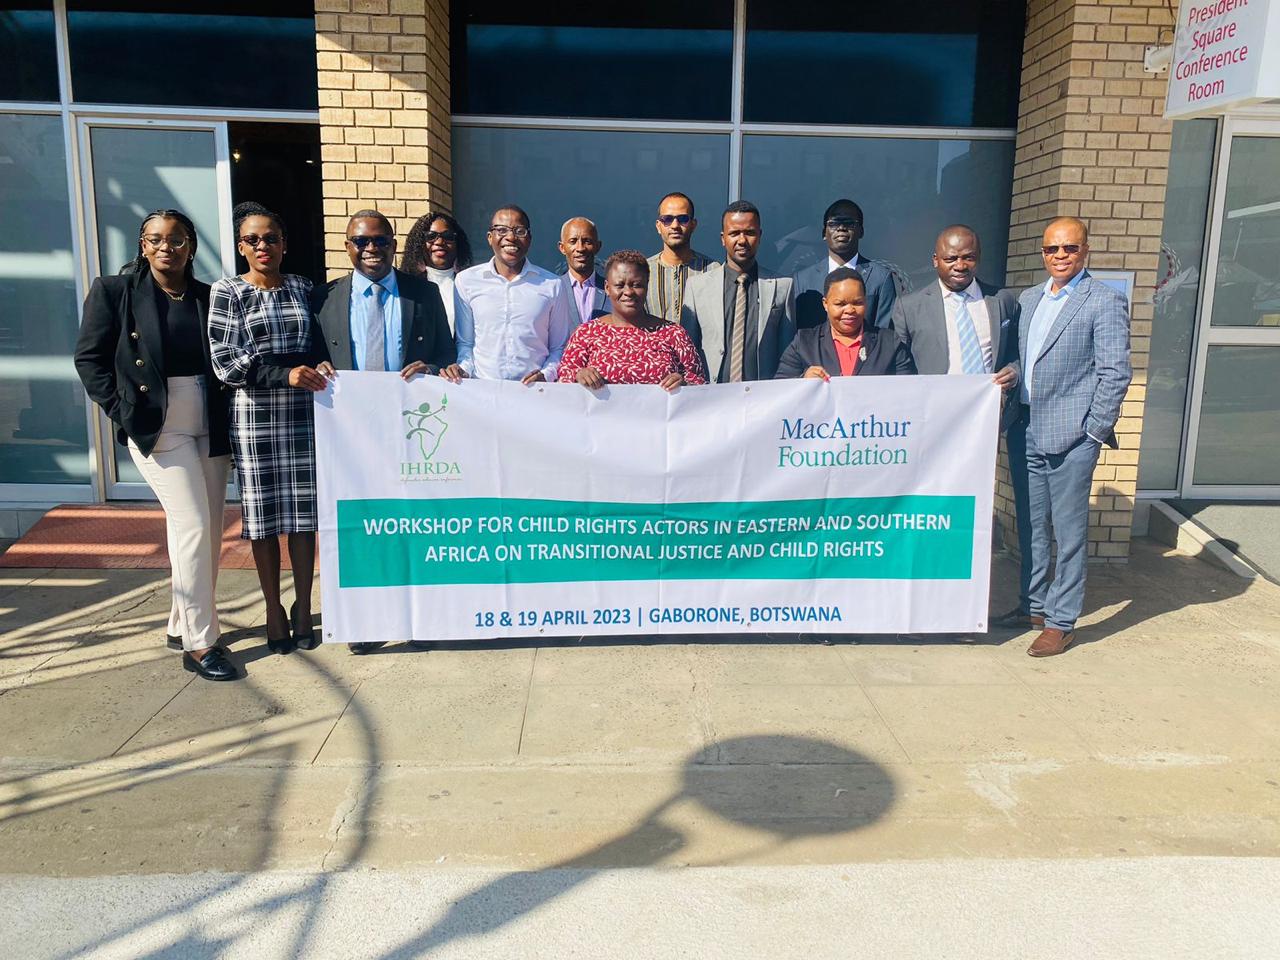 <strong>Mainstreaming child rights in transitional justice processes in Africa: IHRDA organises workshop for child rights actors in East and Southern Africa</strong>